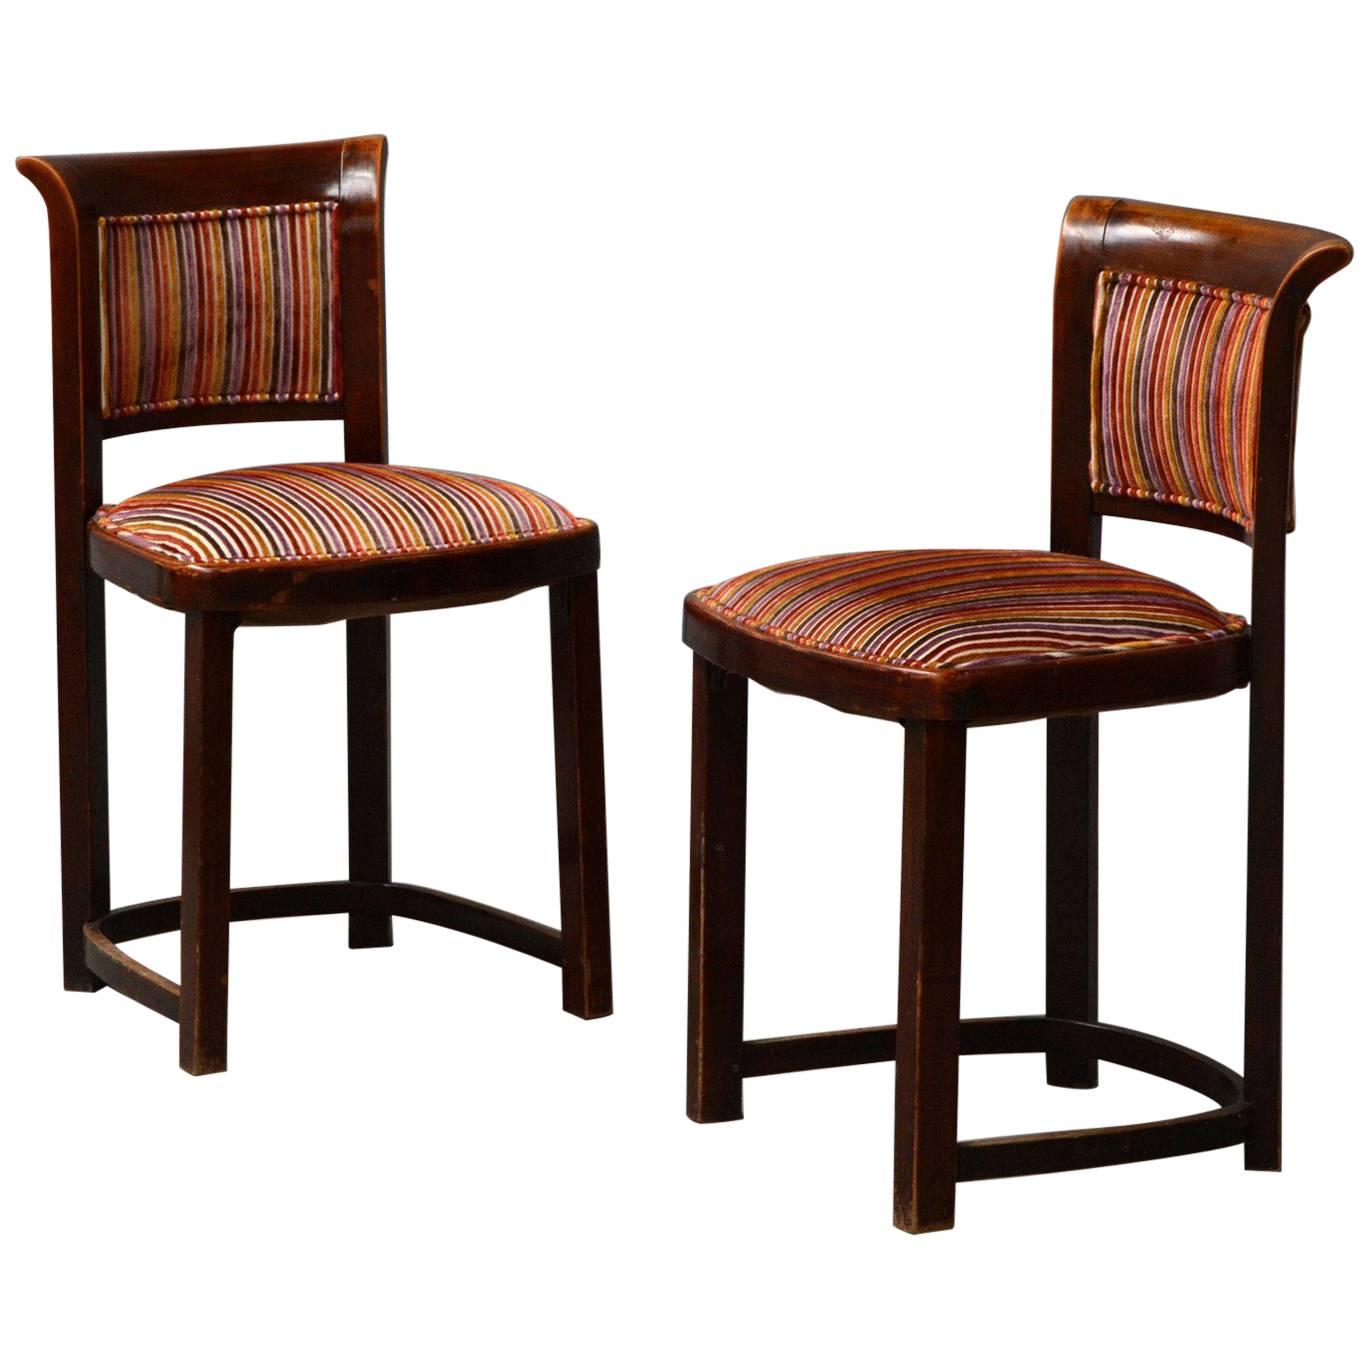 Very Rare Thonet Chairs Attributed to Josef Hoffmann